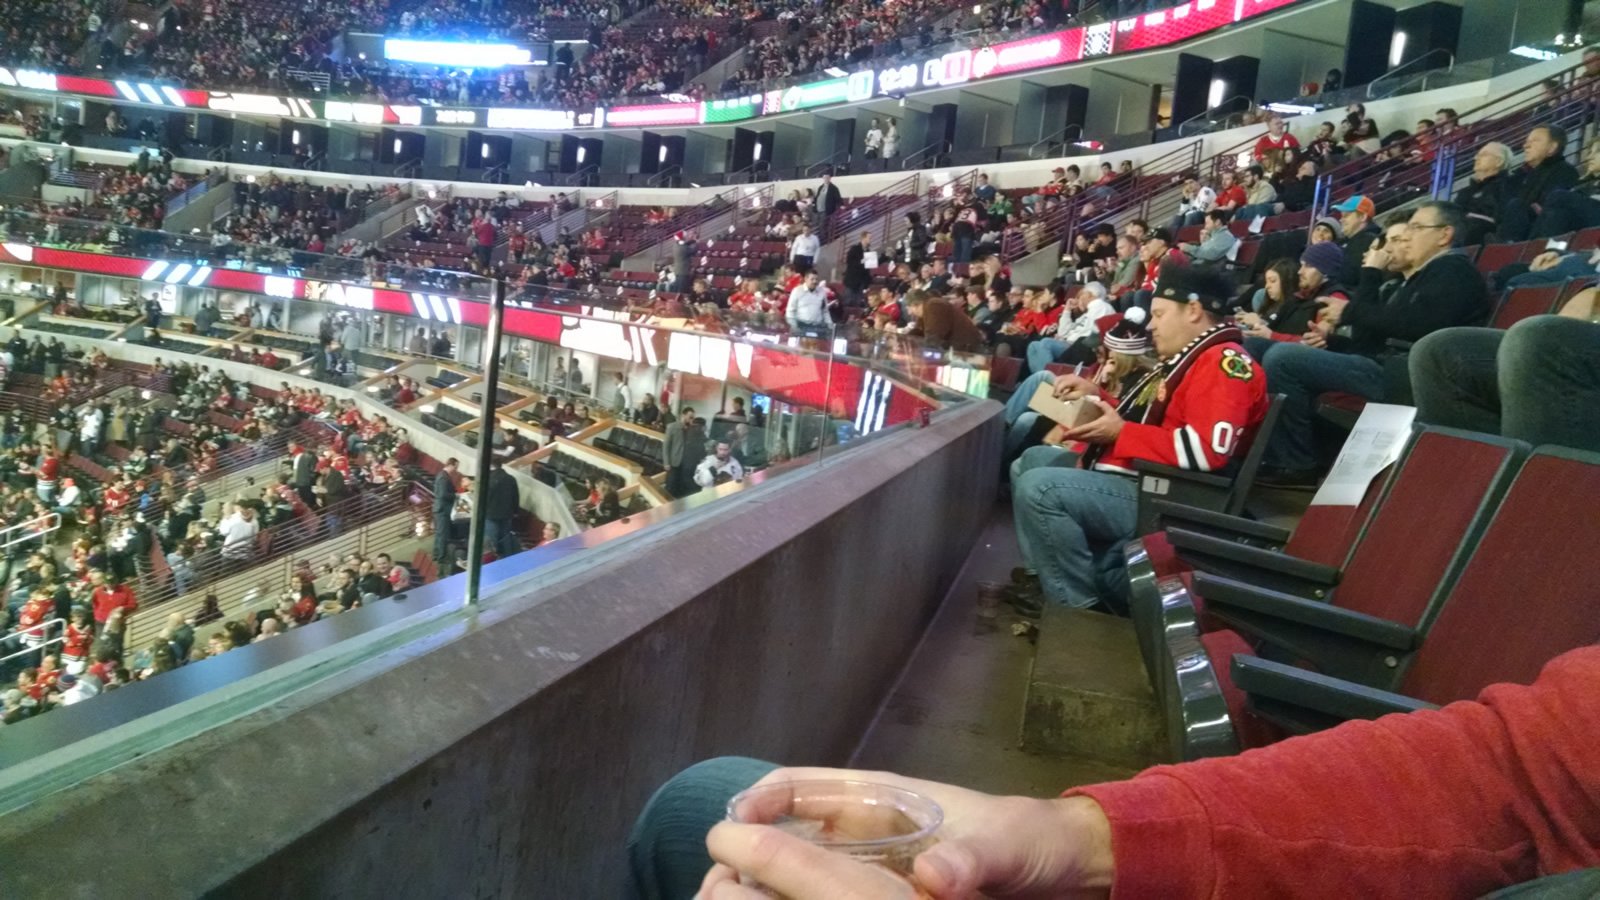 Smaller Seating Sections on the Dedicated Club Level